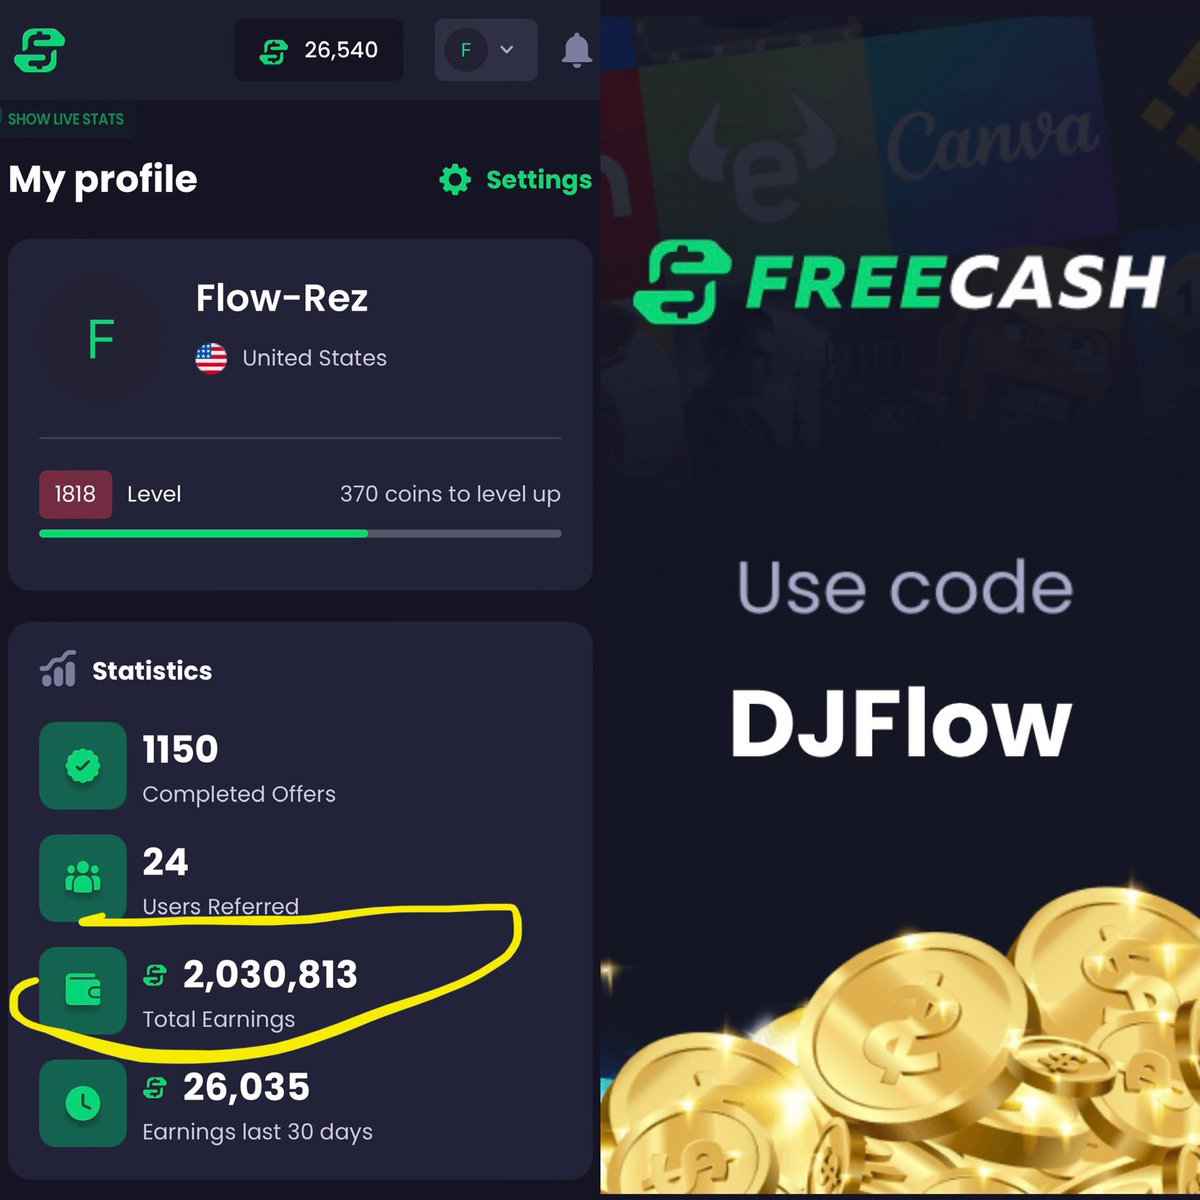 I’ve earned over $2,000 over this past year by completing tasks such as testing apps and playing games on freecash.com/r/DJFlow?utm_c…. If you sign up through my link you can open a free case and win up to $250 #swagbucks #freebies #coupons #fortnite #freeskins #FreeCash #league